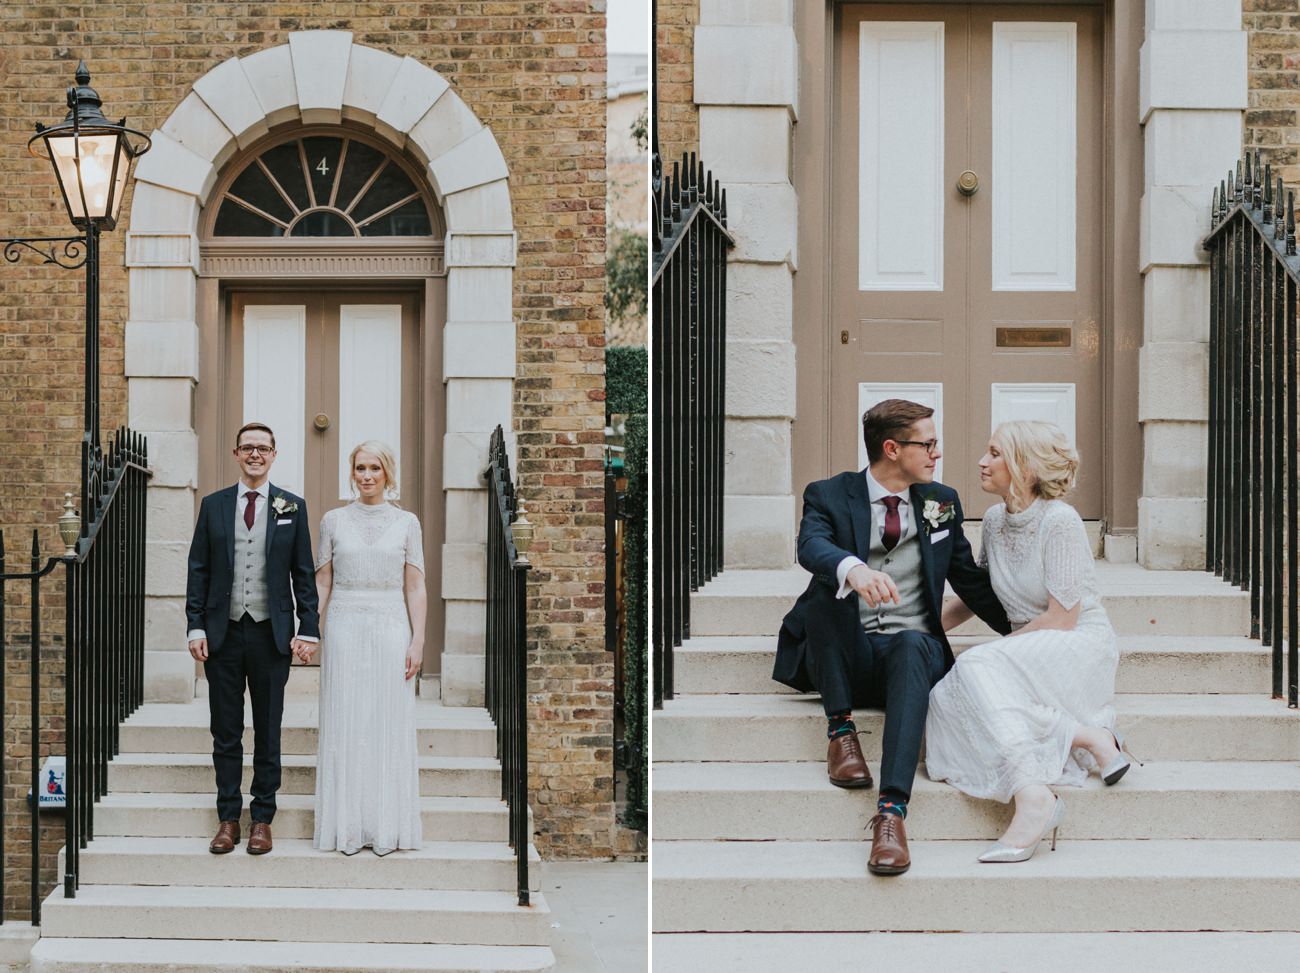 Portraits of bride and groom in front of a door in London. They are sitting and staring at each other and standing looking into the camera.
Devonshire Terrace Wedding London Alternative Wedding Photographer